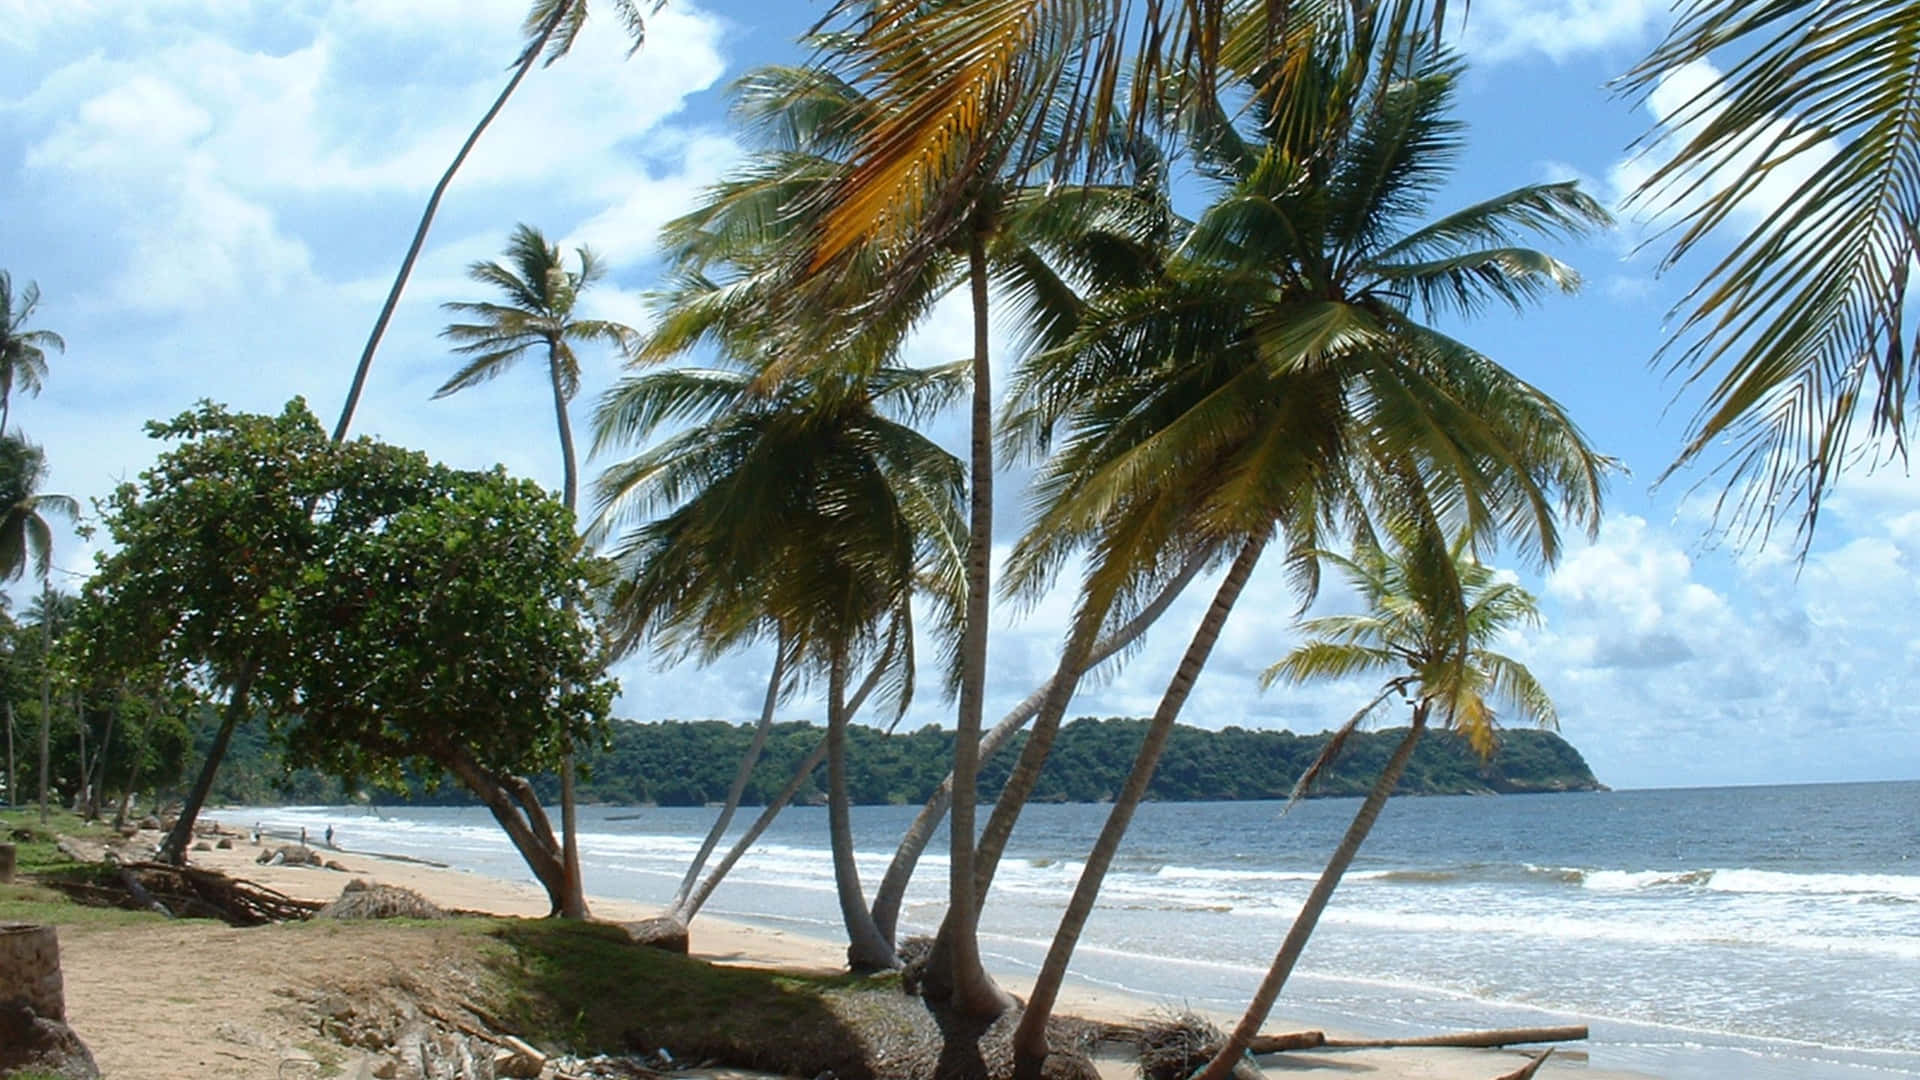 A peaceful beach scene with palm trees silhouetted against a turquoise sky